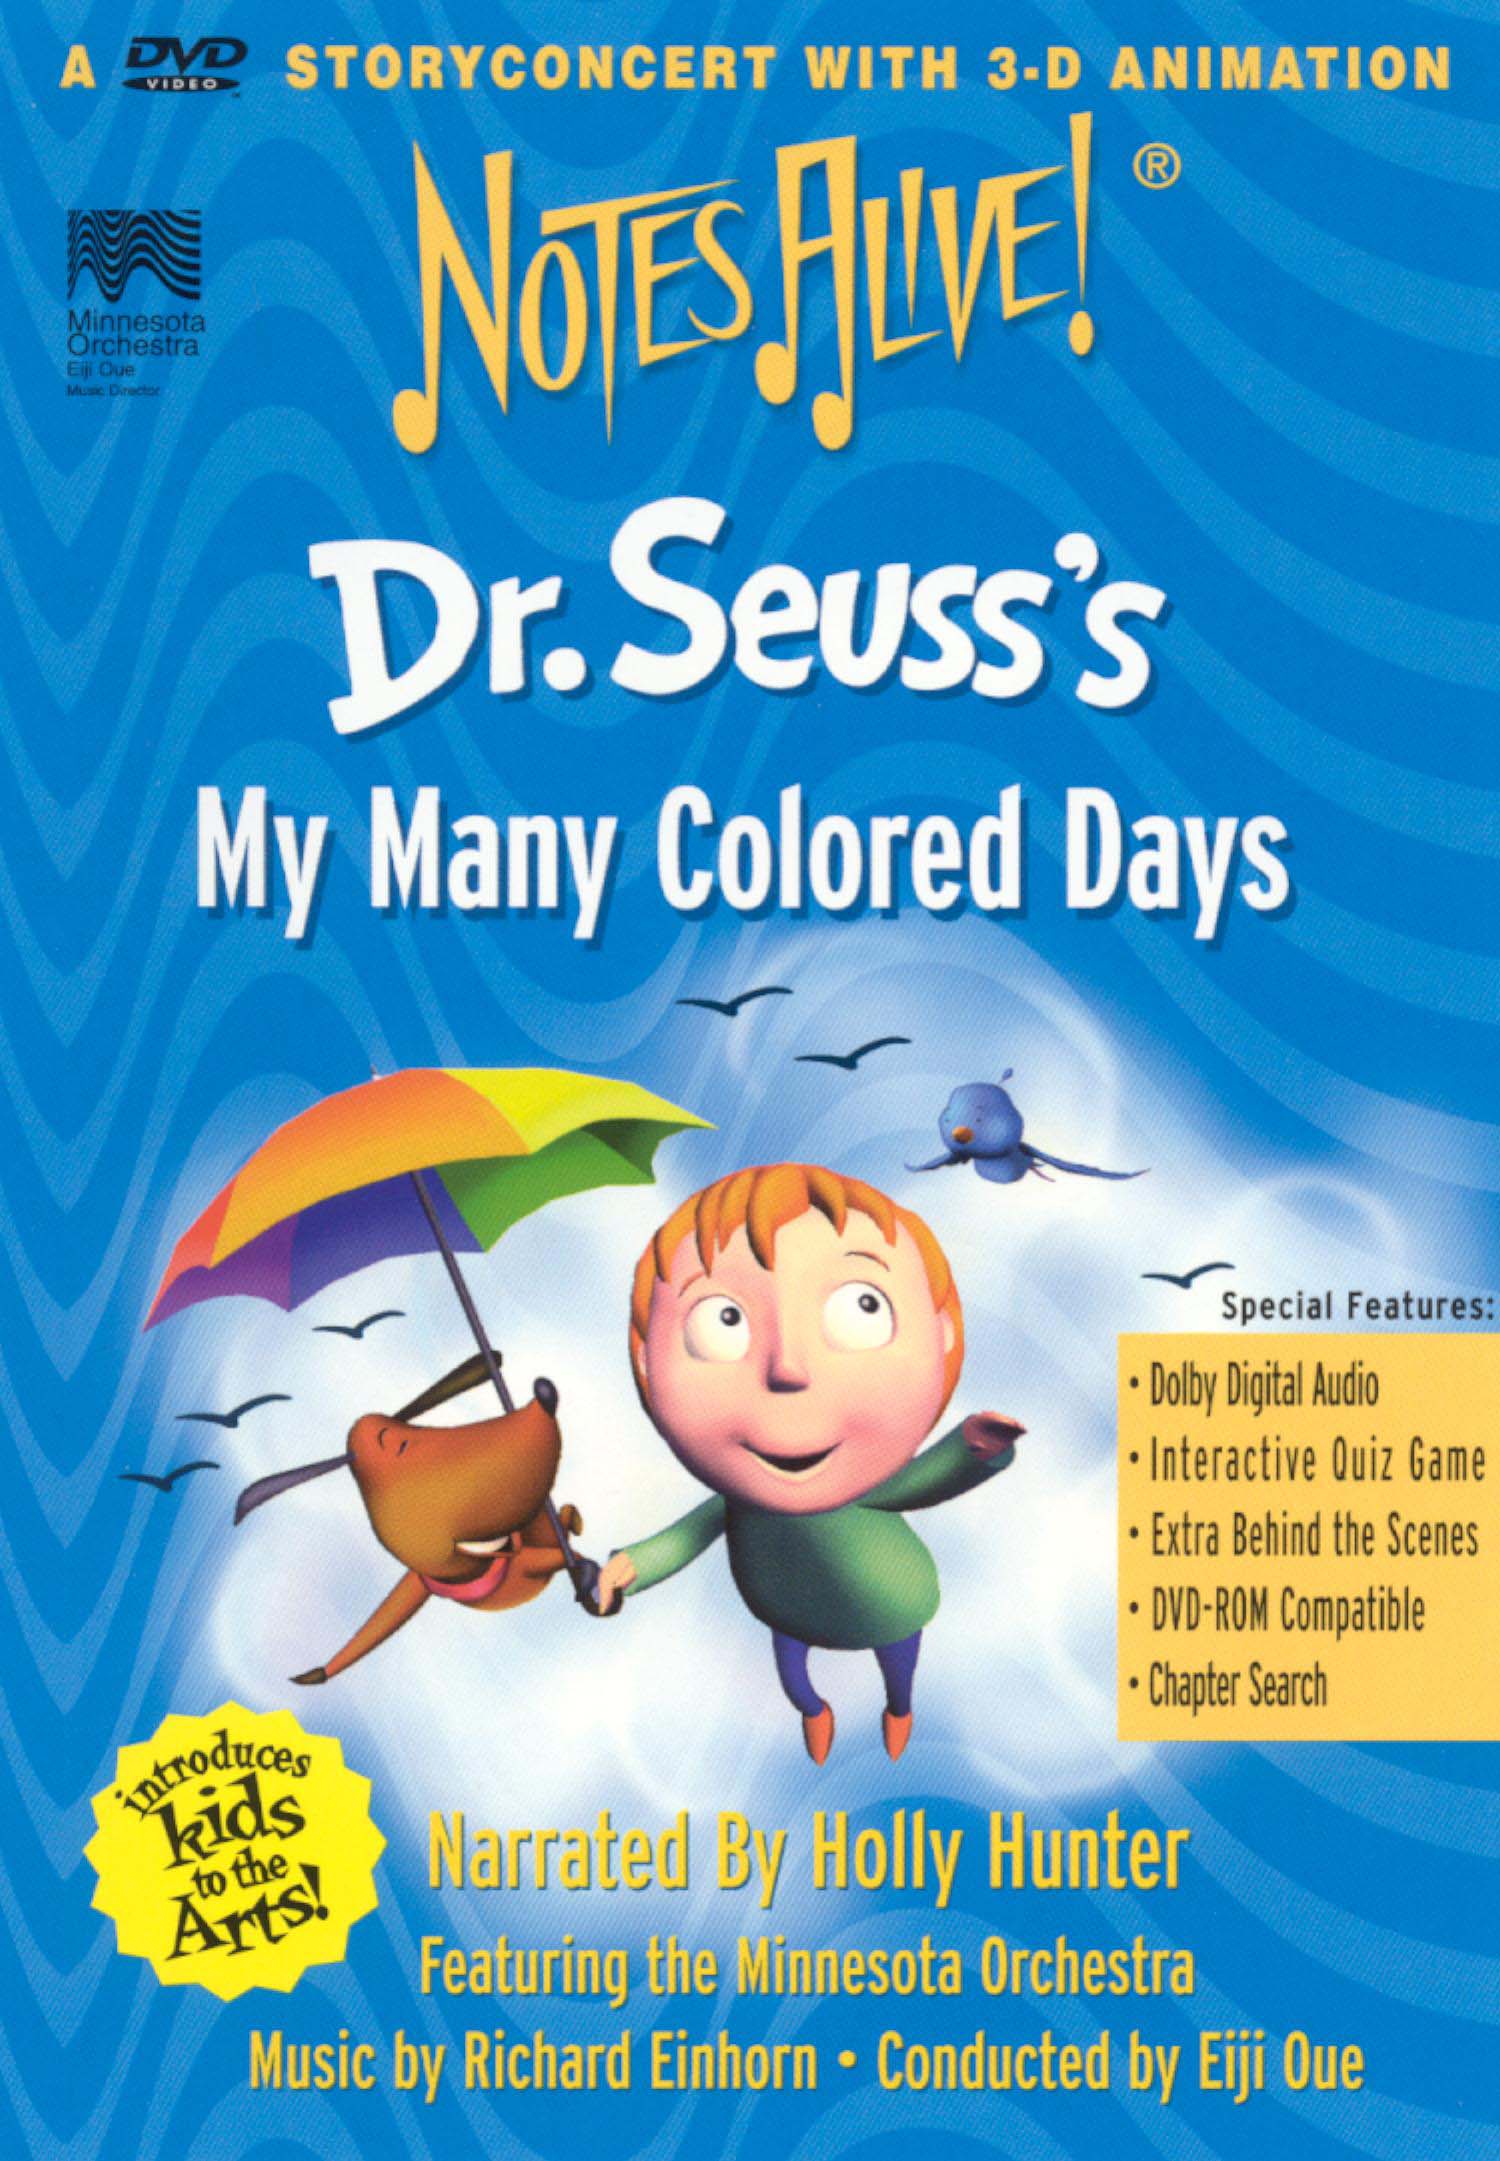 My Many Colored Days by Dr. Seuss